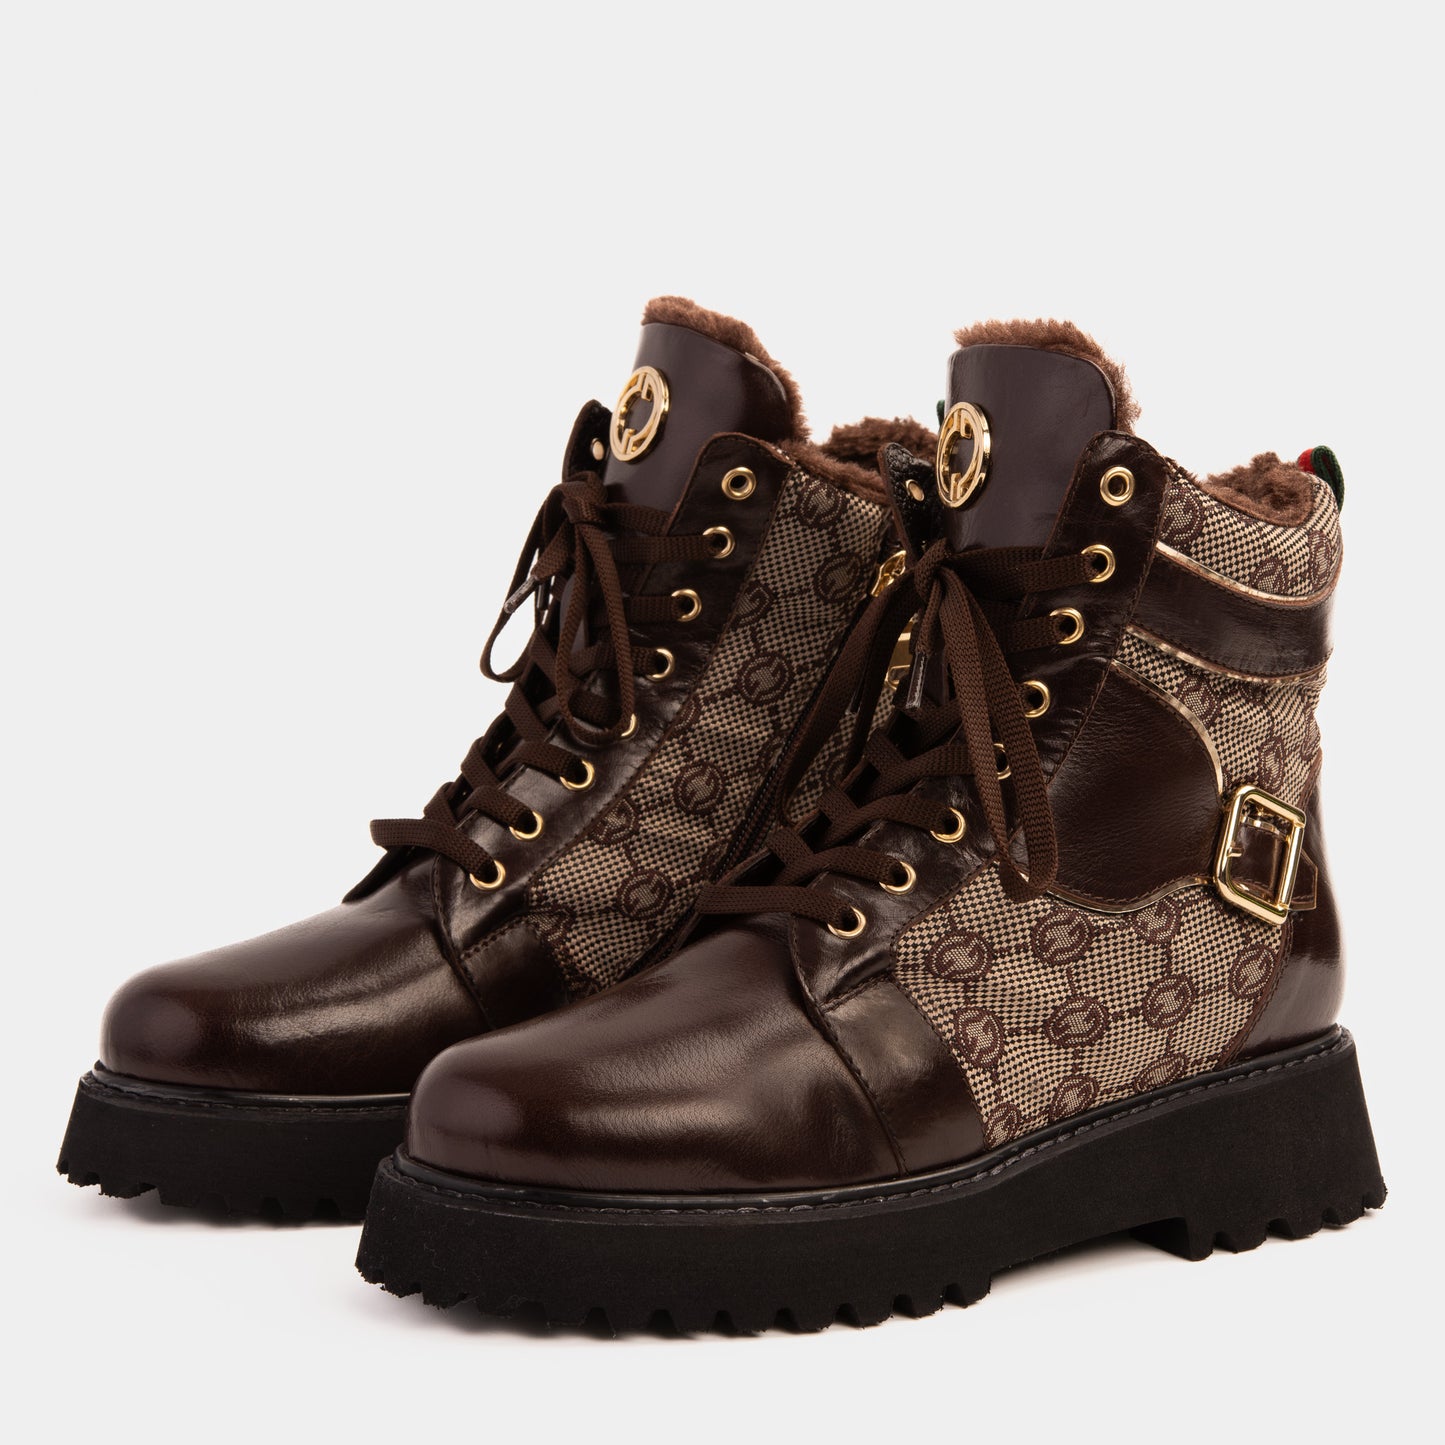 The Boston Leather Lace-Up Ankle Women Brown Boot With a Side Zipper